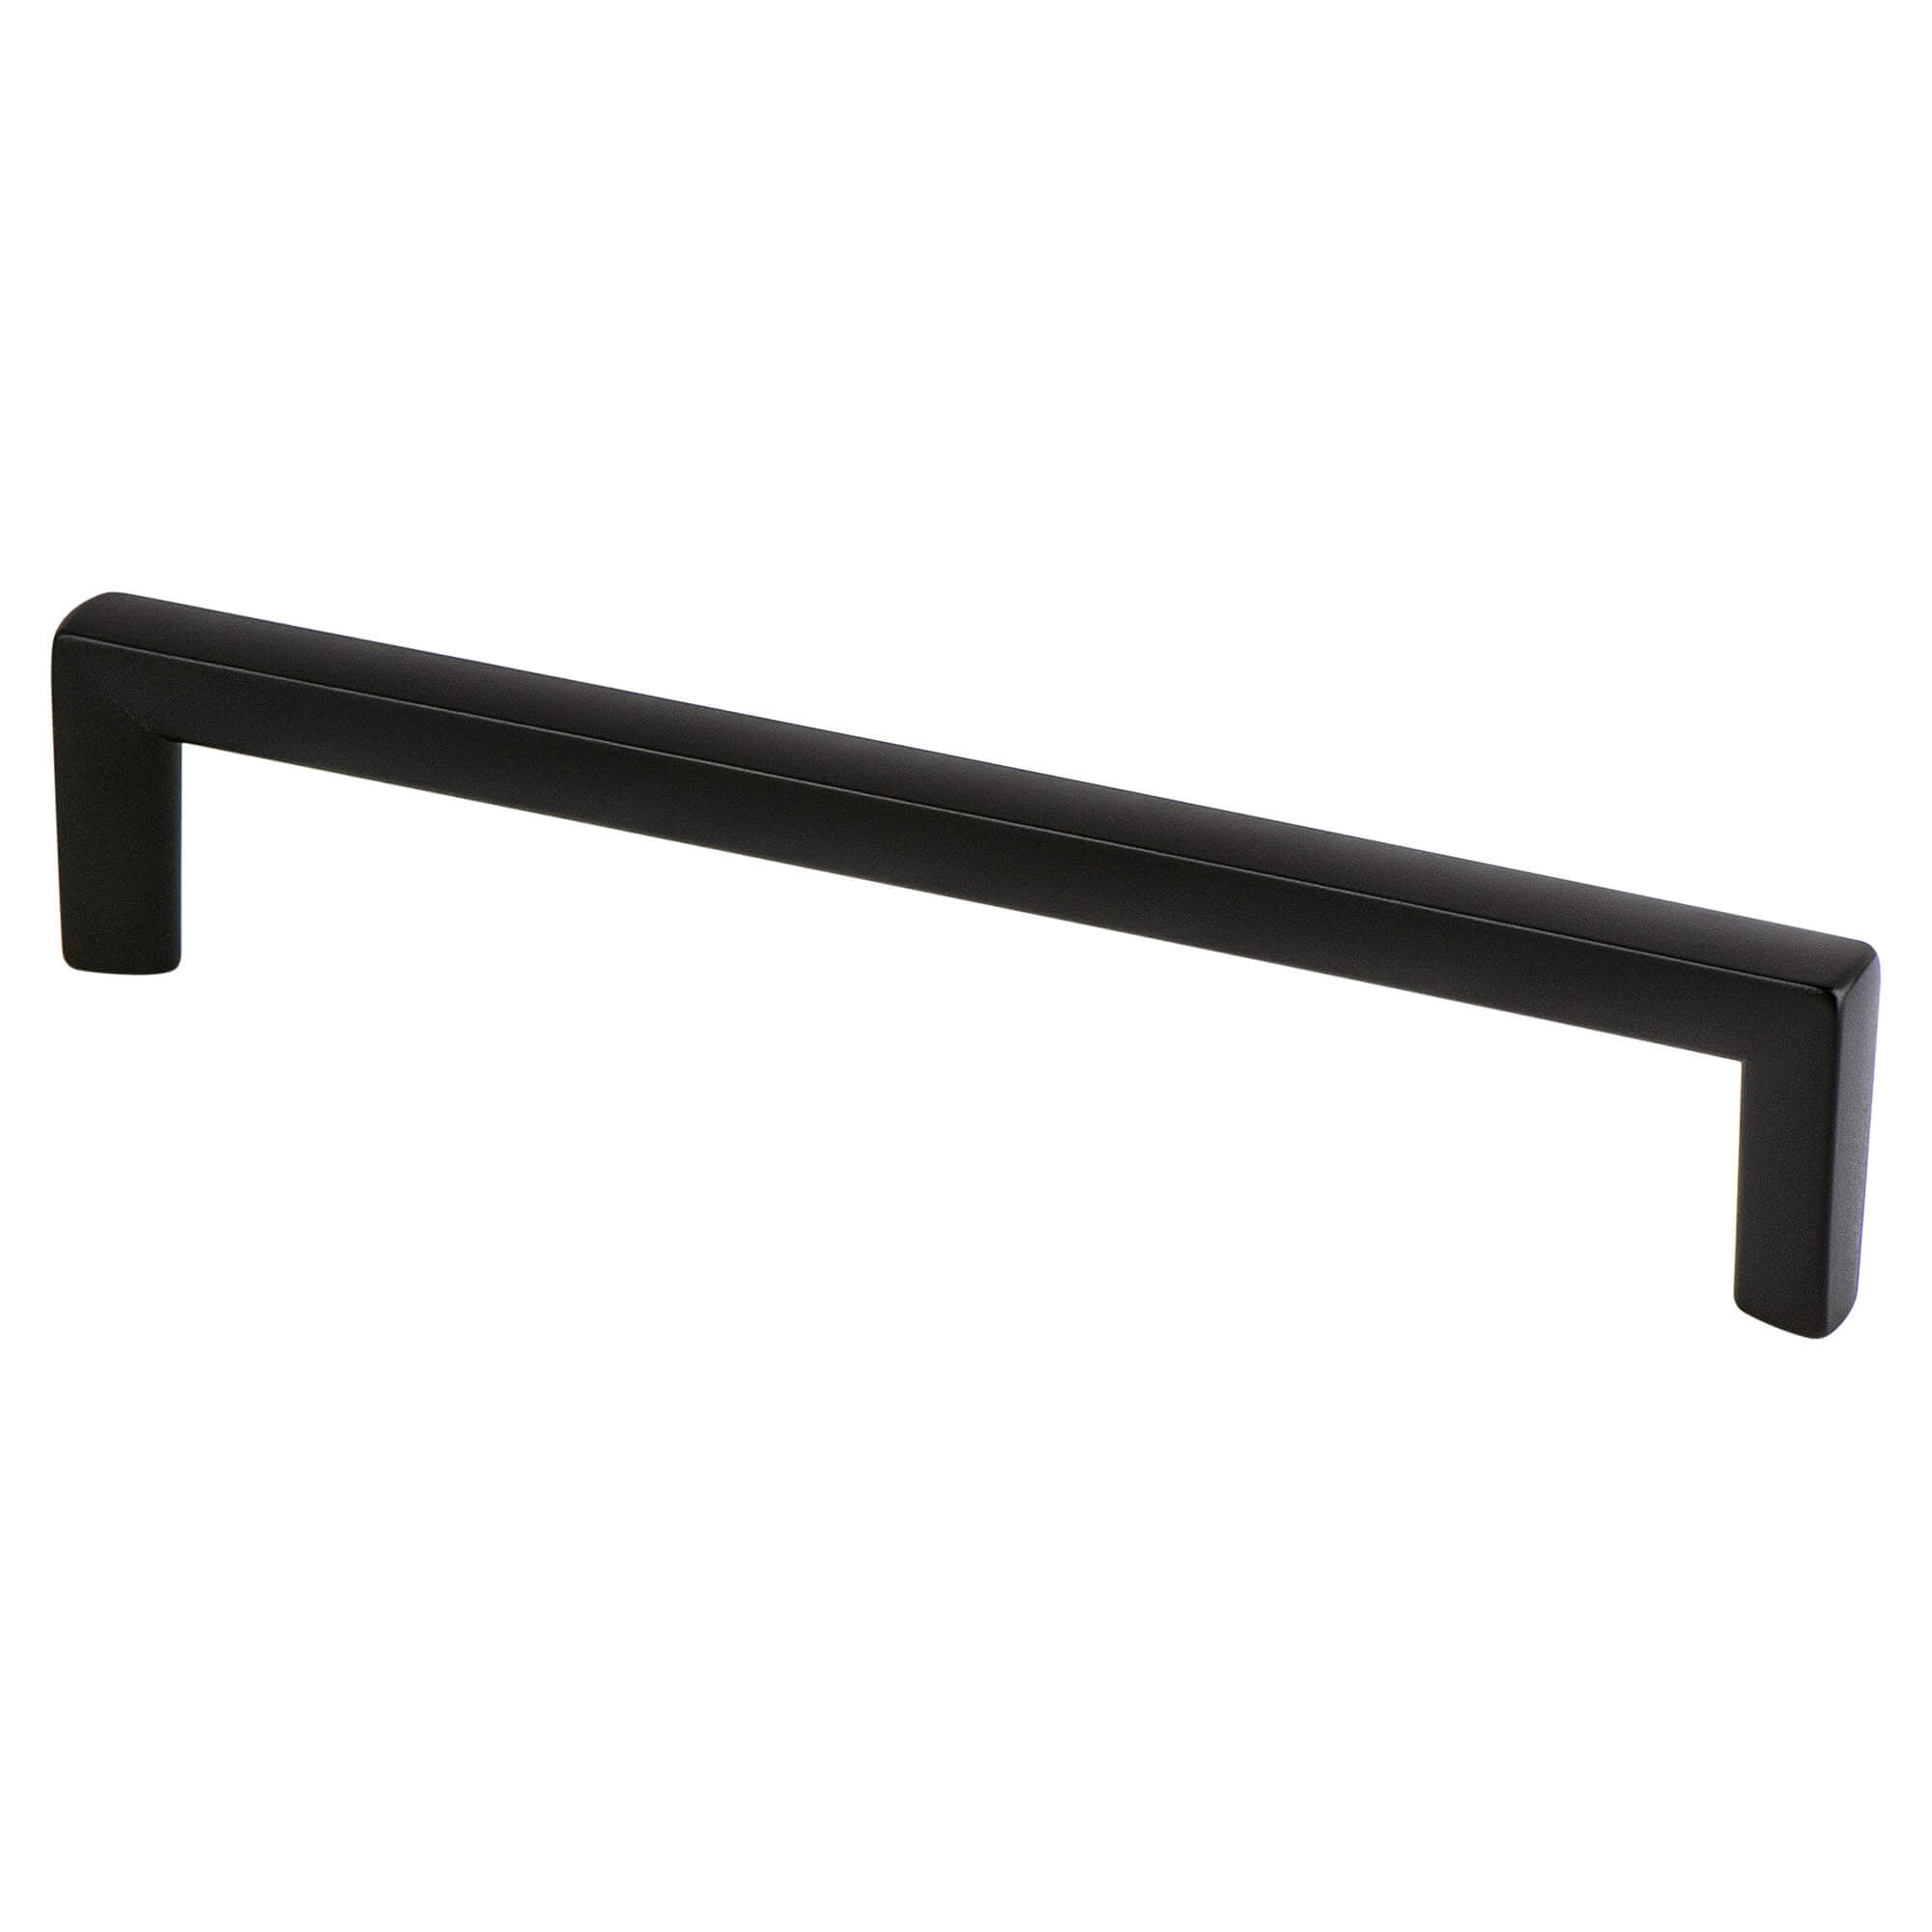 Shop Berenson 4118 Metro 6-5/16" Center To Center Handle Cabinet Pull from Walmart on Openhaus